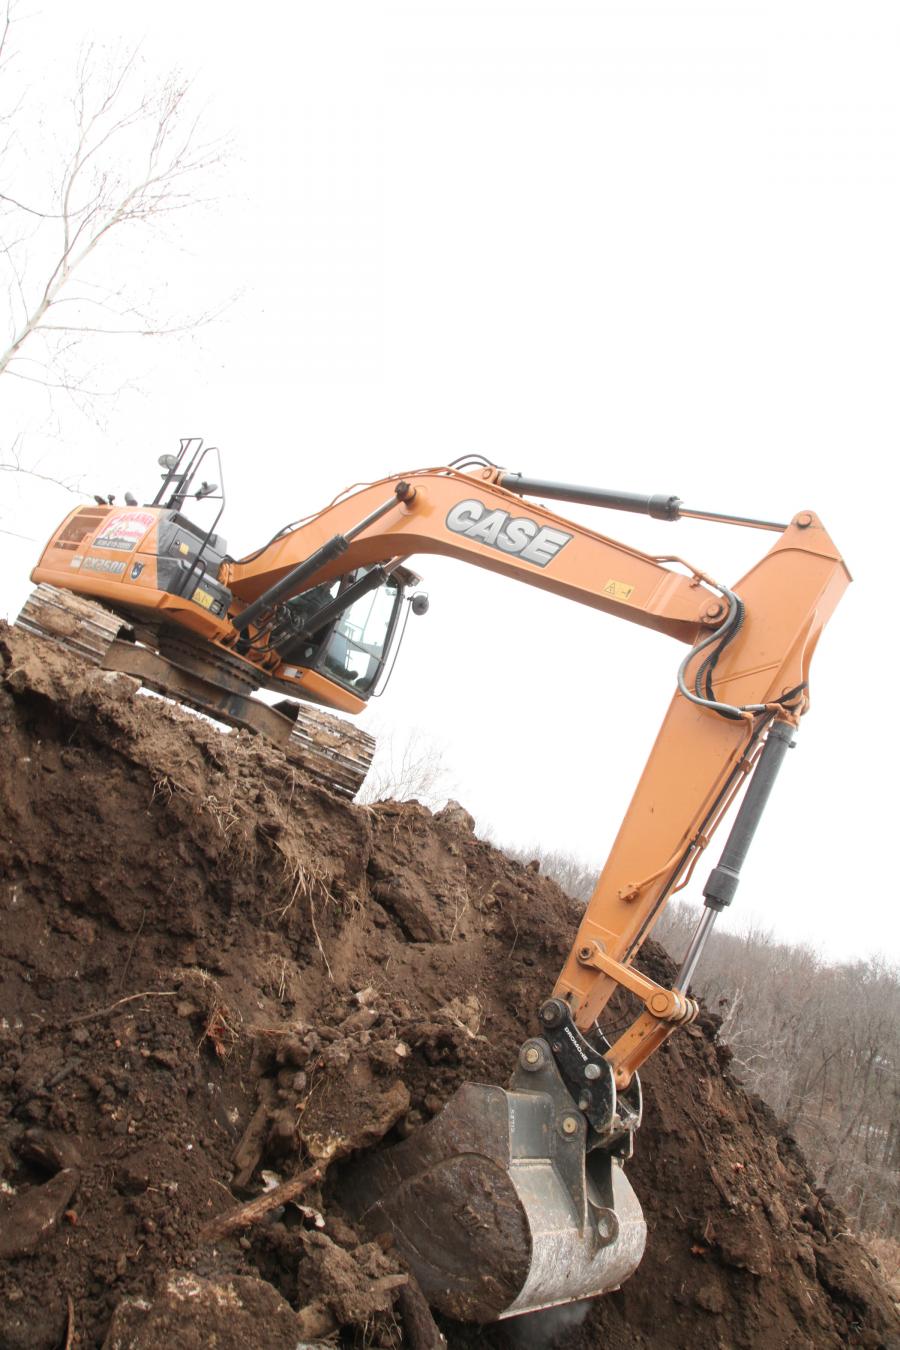 Faulkner Excavating is using a 25-ton Case CX250D excavator on the Kirkwood site.